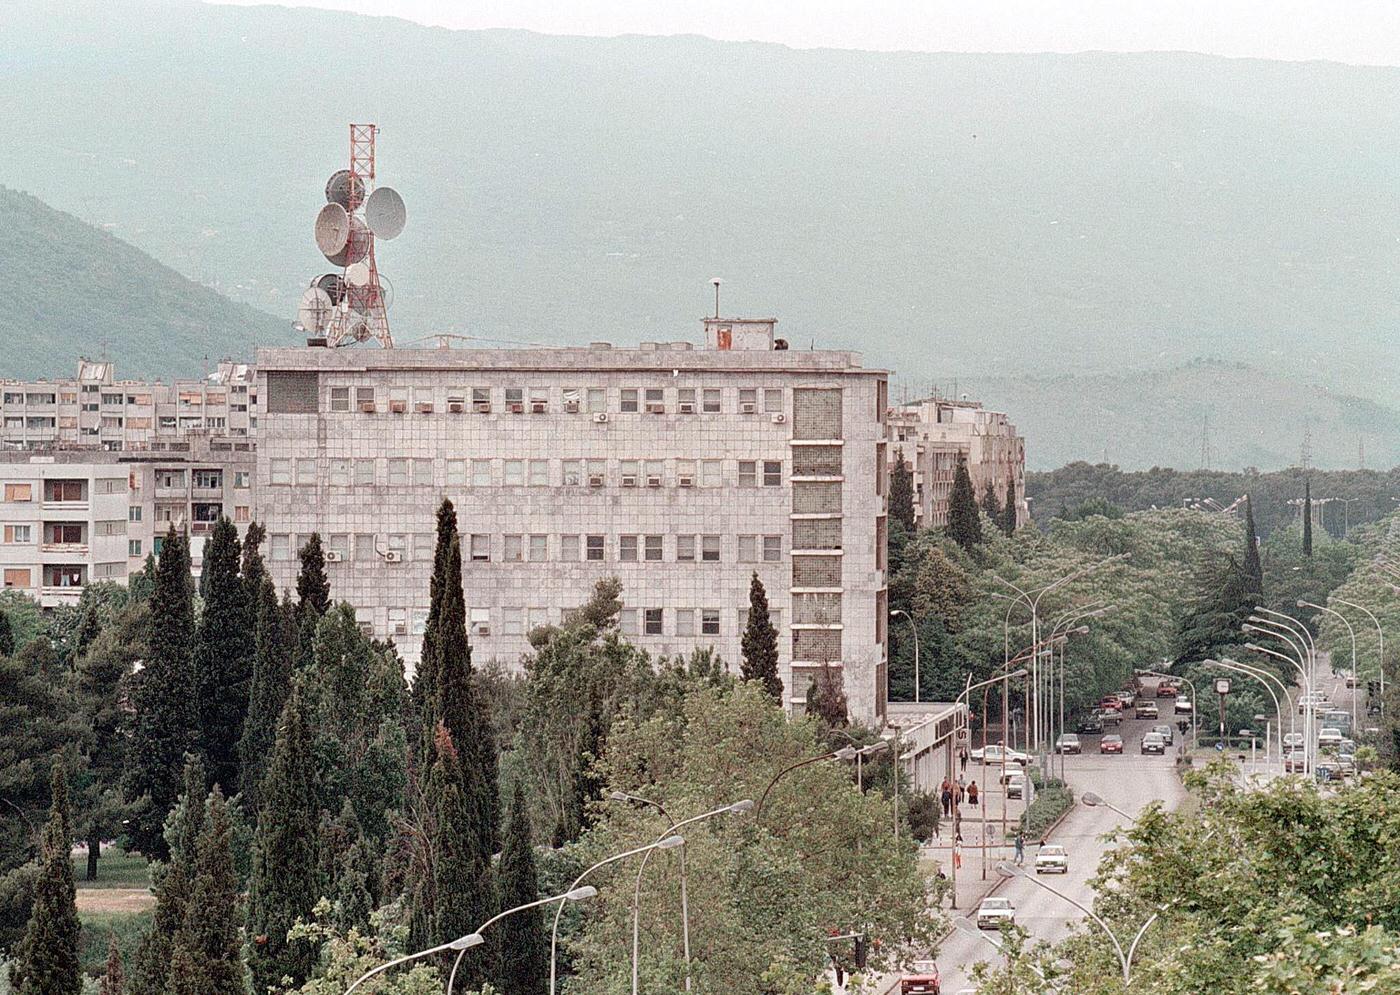 General view of Podgorica, the capital of Montenegro, with the building of the Interior Ministry in the center, May 17, 1999.